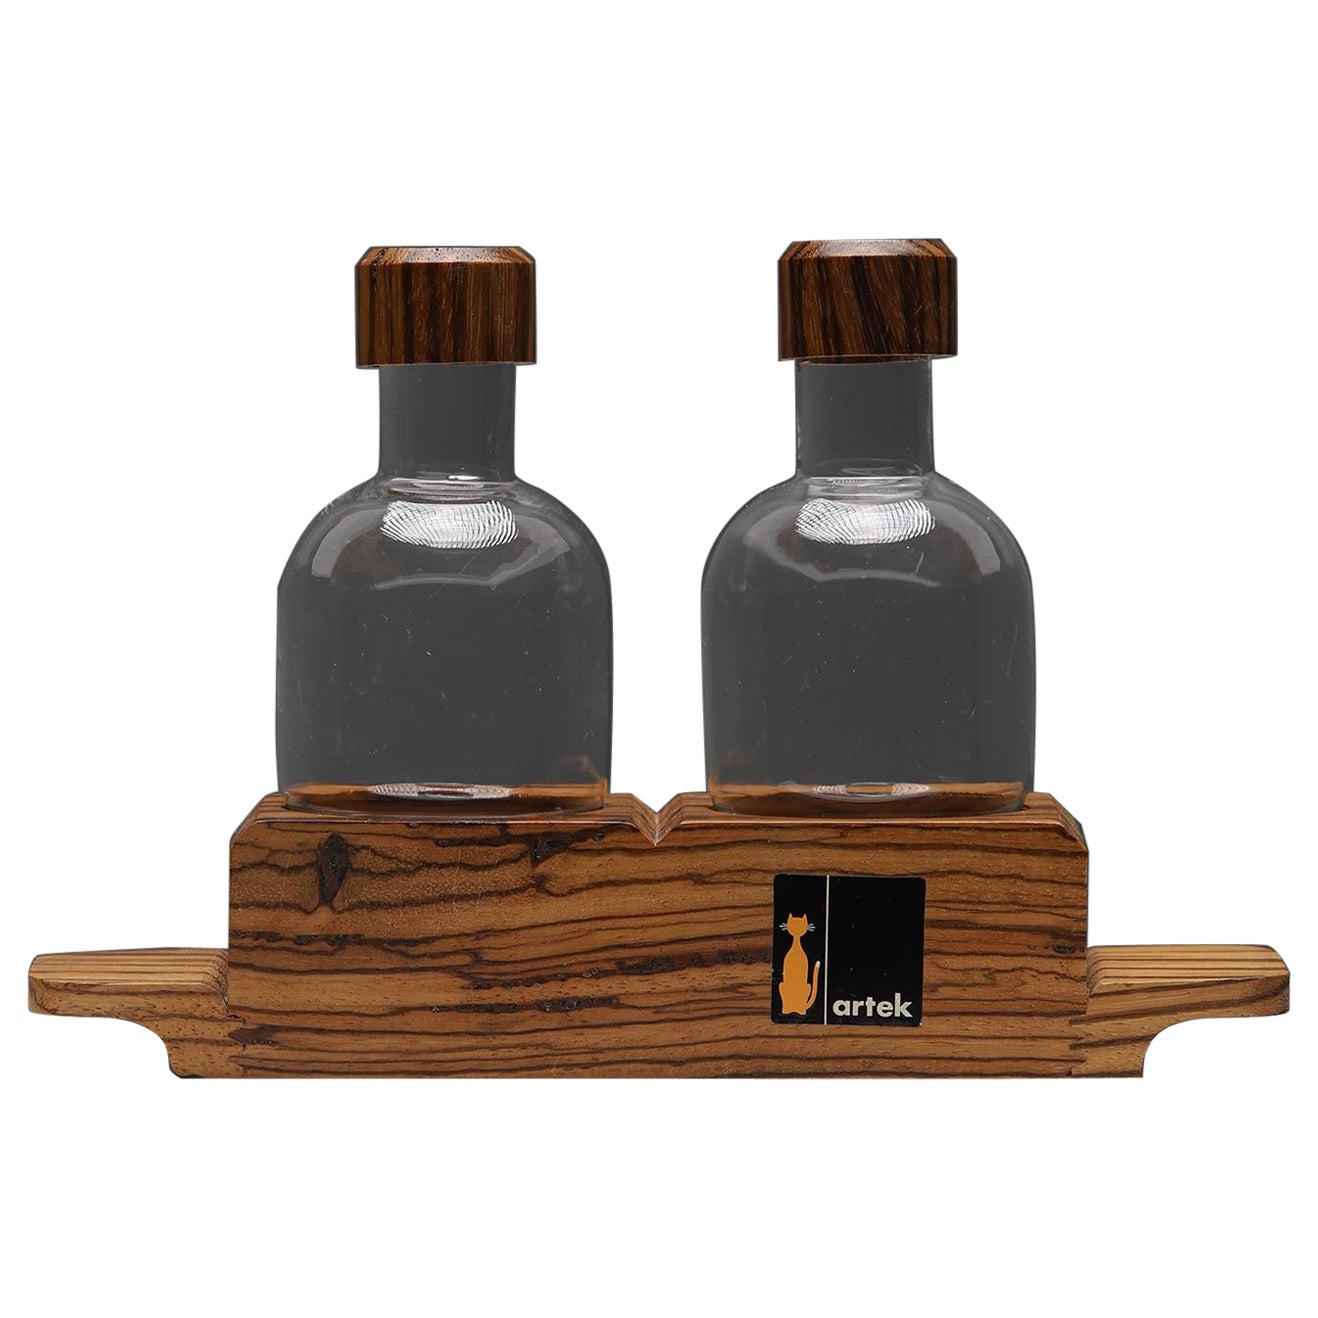 Mid Century olive oil and vinegar set designed and produced by Artek in the 1960